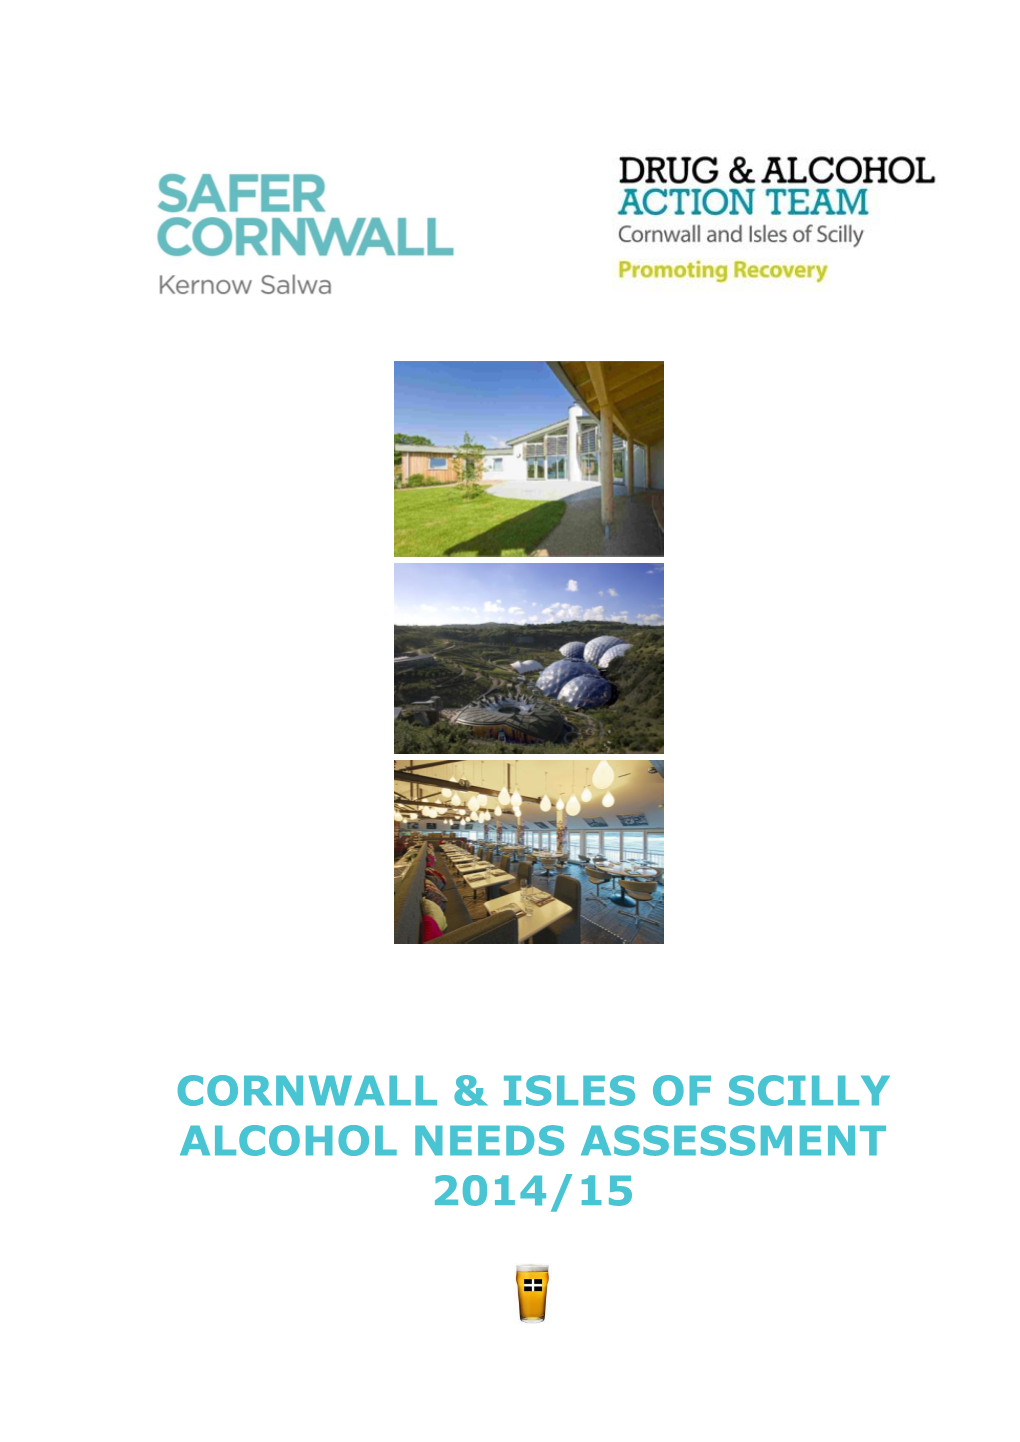 Cornwall & Isles of Scilly Alcohol